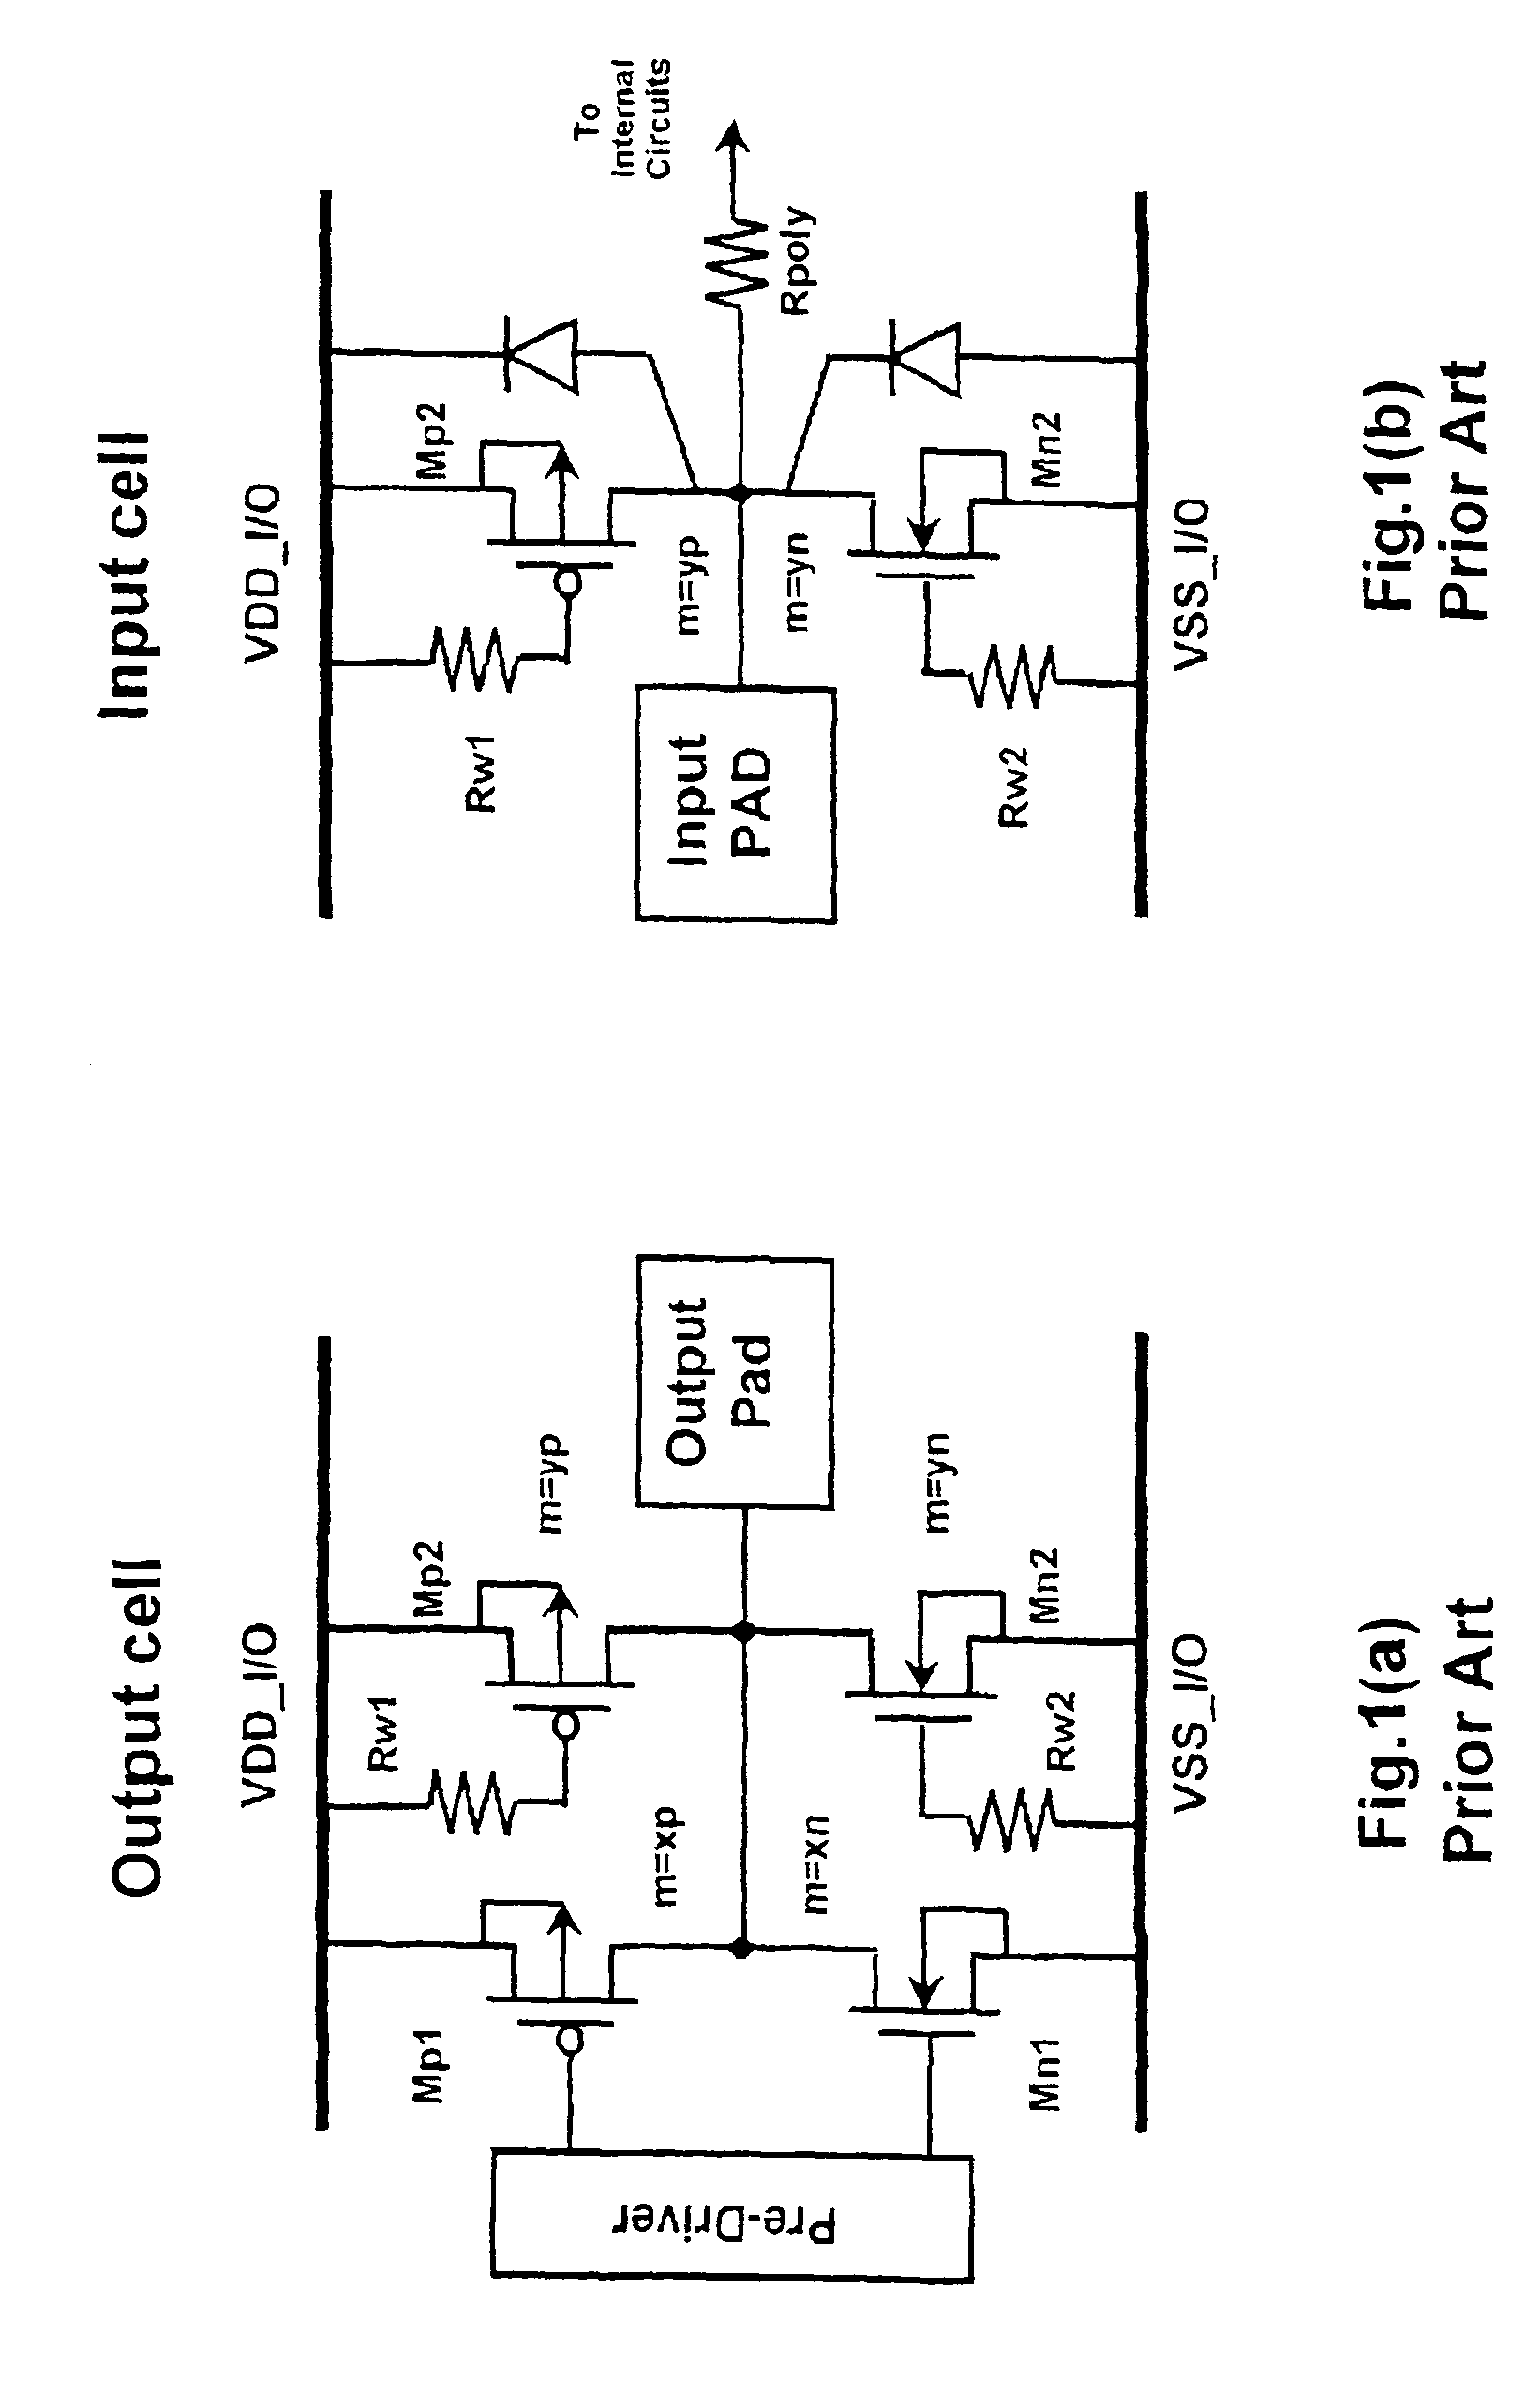 ESD protection design with turn-on restraining method and structures